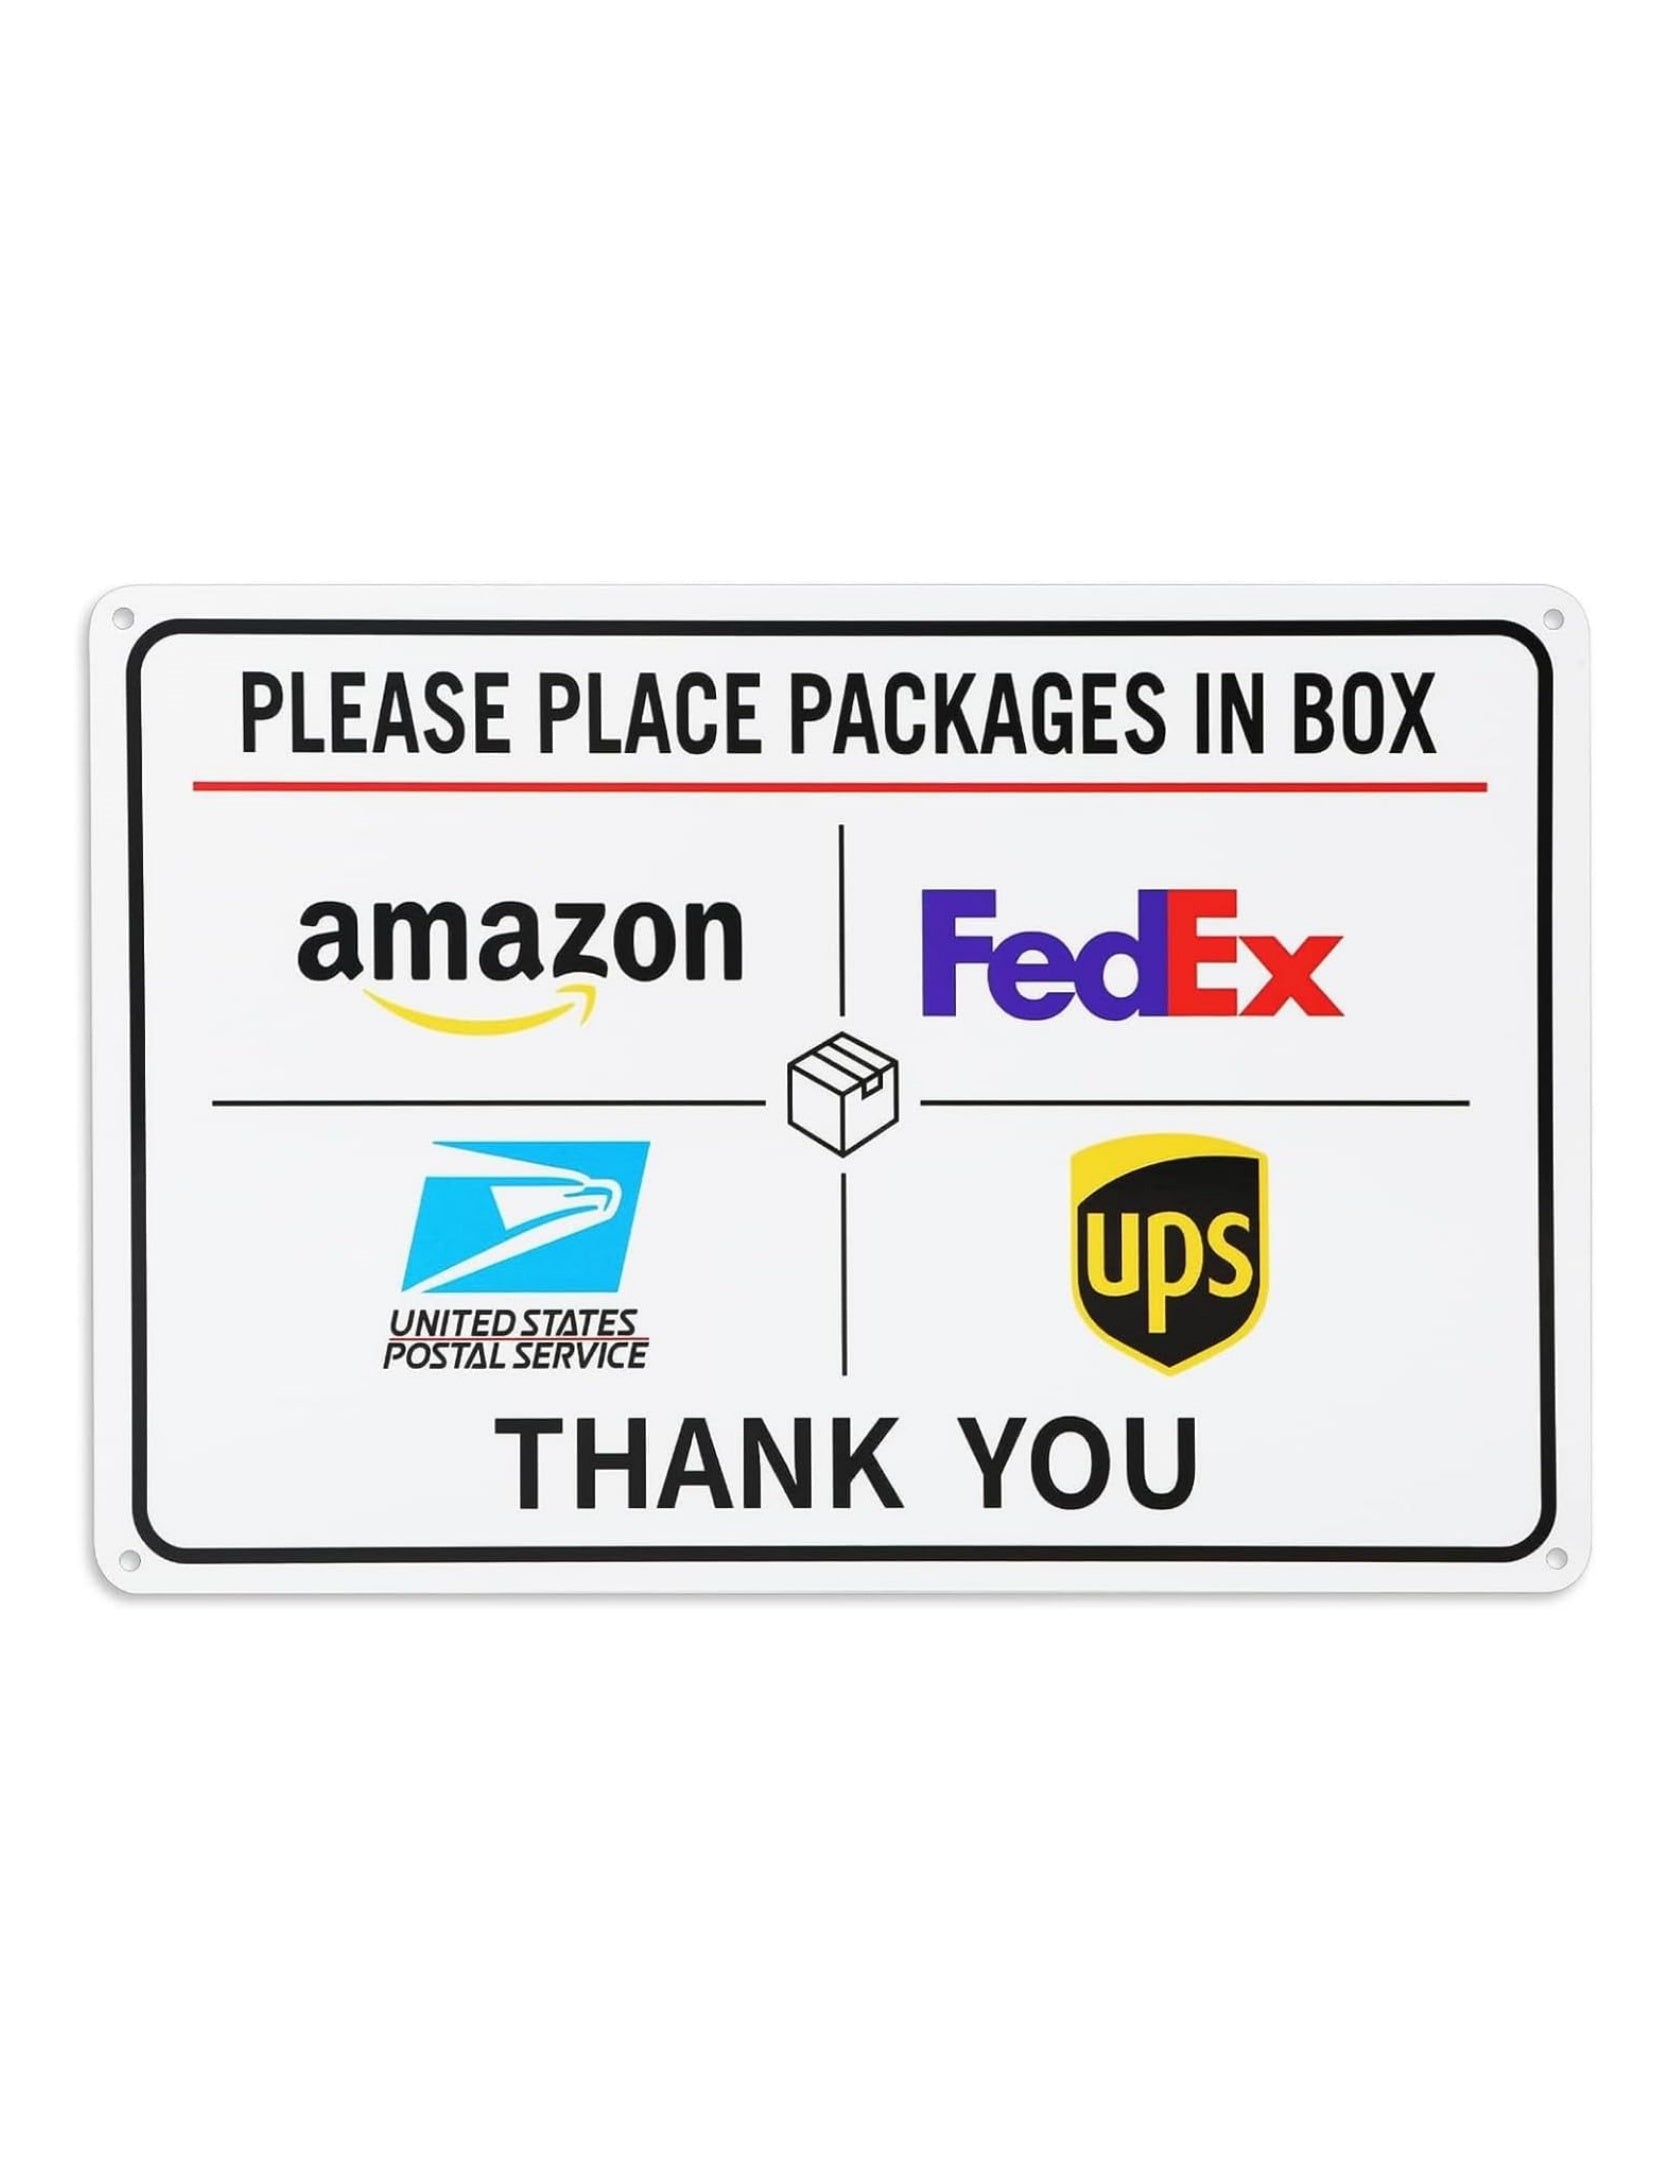 Thten Package Delivery Sign Instructions Amazon UPS FedEx Delivery Box Sign,12" x 8" Industrial Grade Aluminum, Easy Mounting,Rust-Free/Fade Resistance,Indoor/Outdoor(Simple)